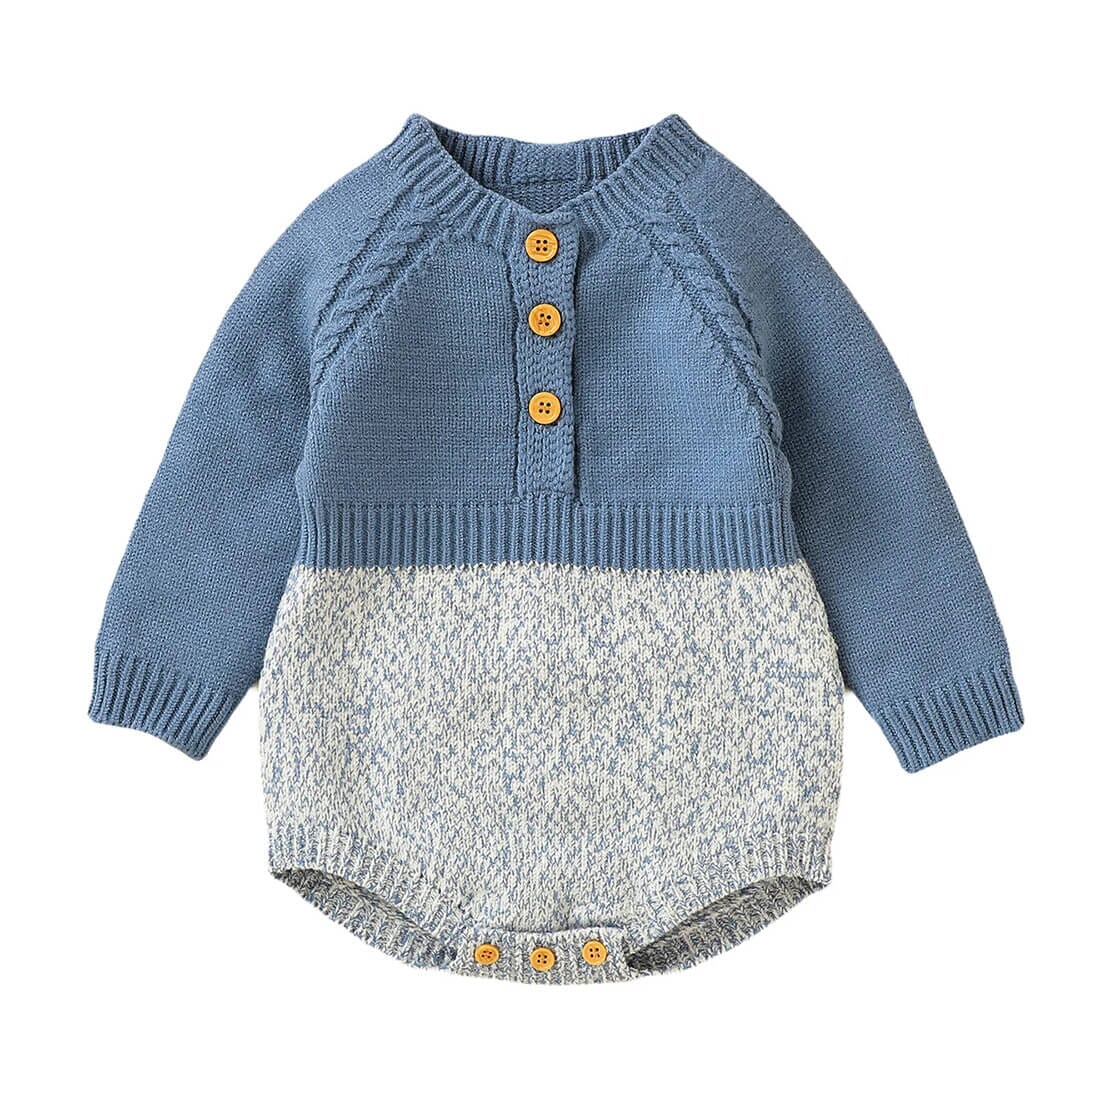 Long Sleeve Knitted Baby Romper Blue 0-3 M 